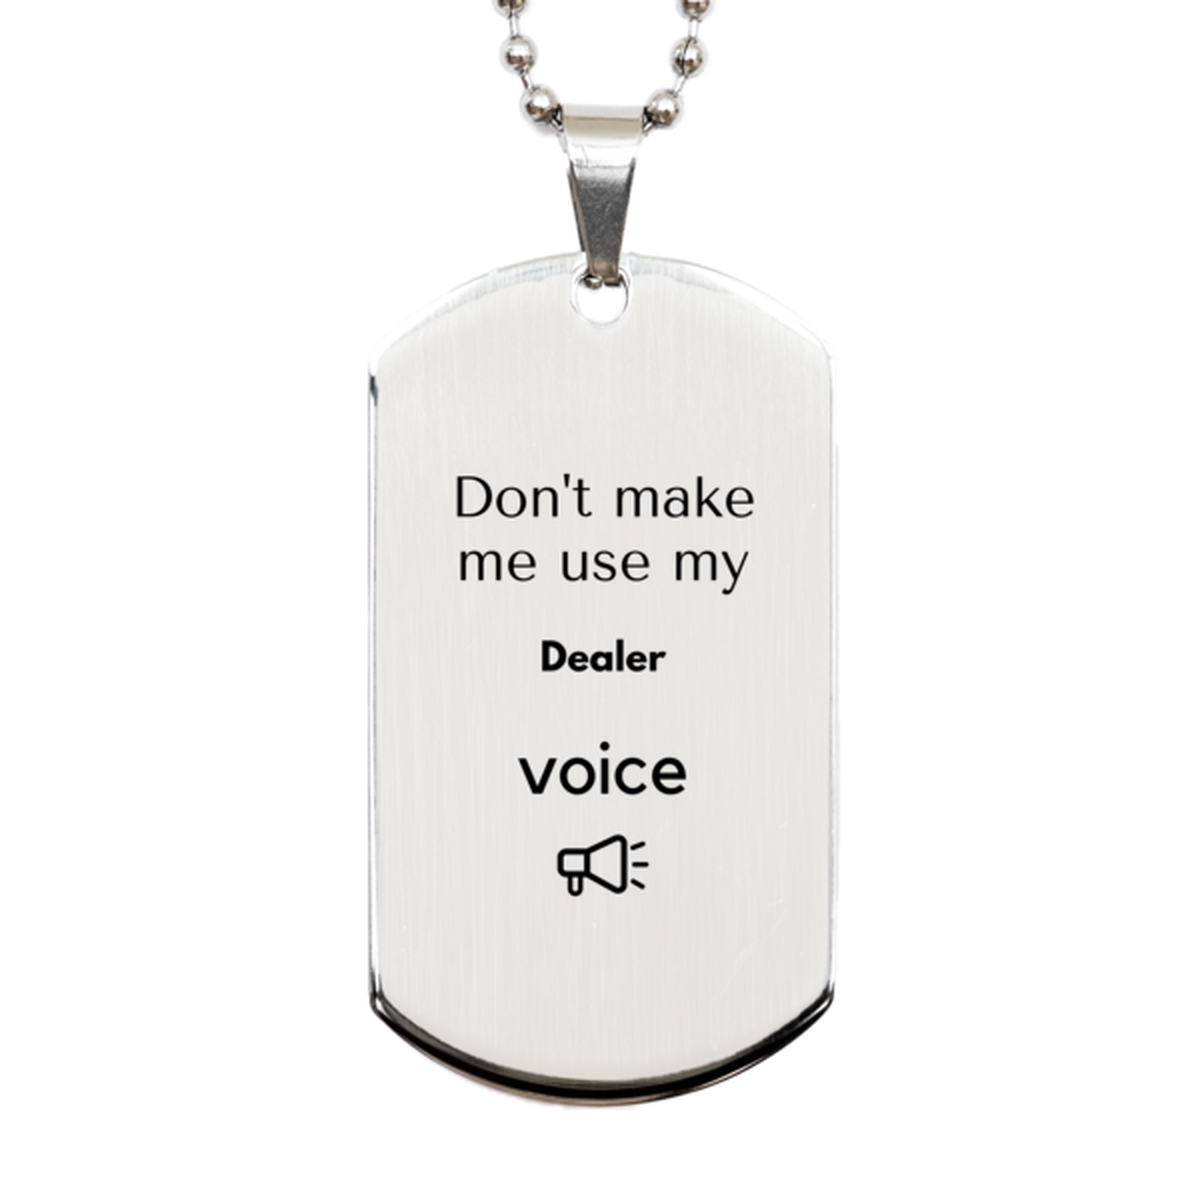 Don't make me use my Dealer voice, Sarcasm Dealer Gifts, Christmas Dealer Silver Dog Tag Birthday Unique Gifts For Dealer Coworkers, Men, Women, Colleague, Friends